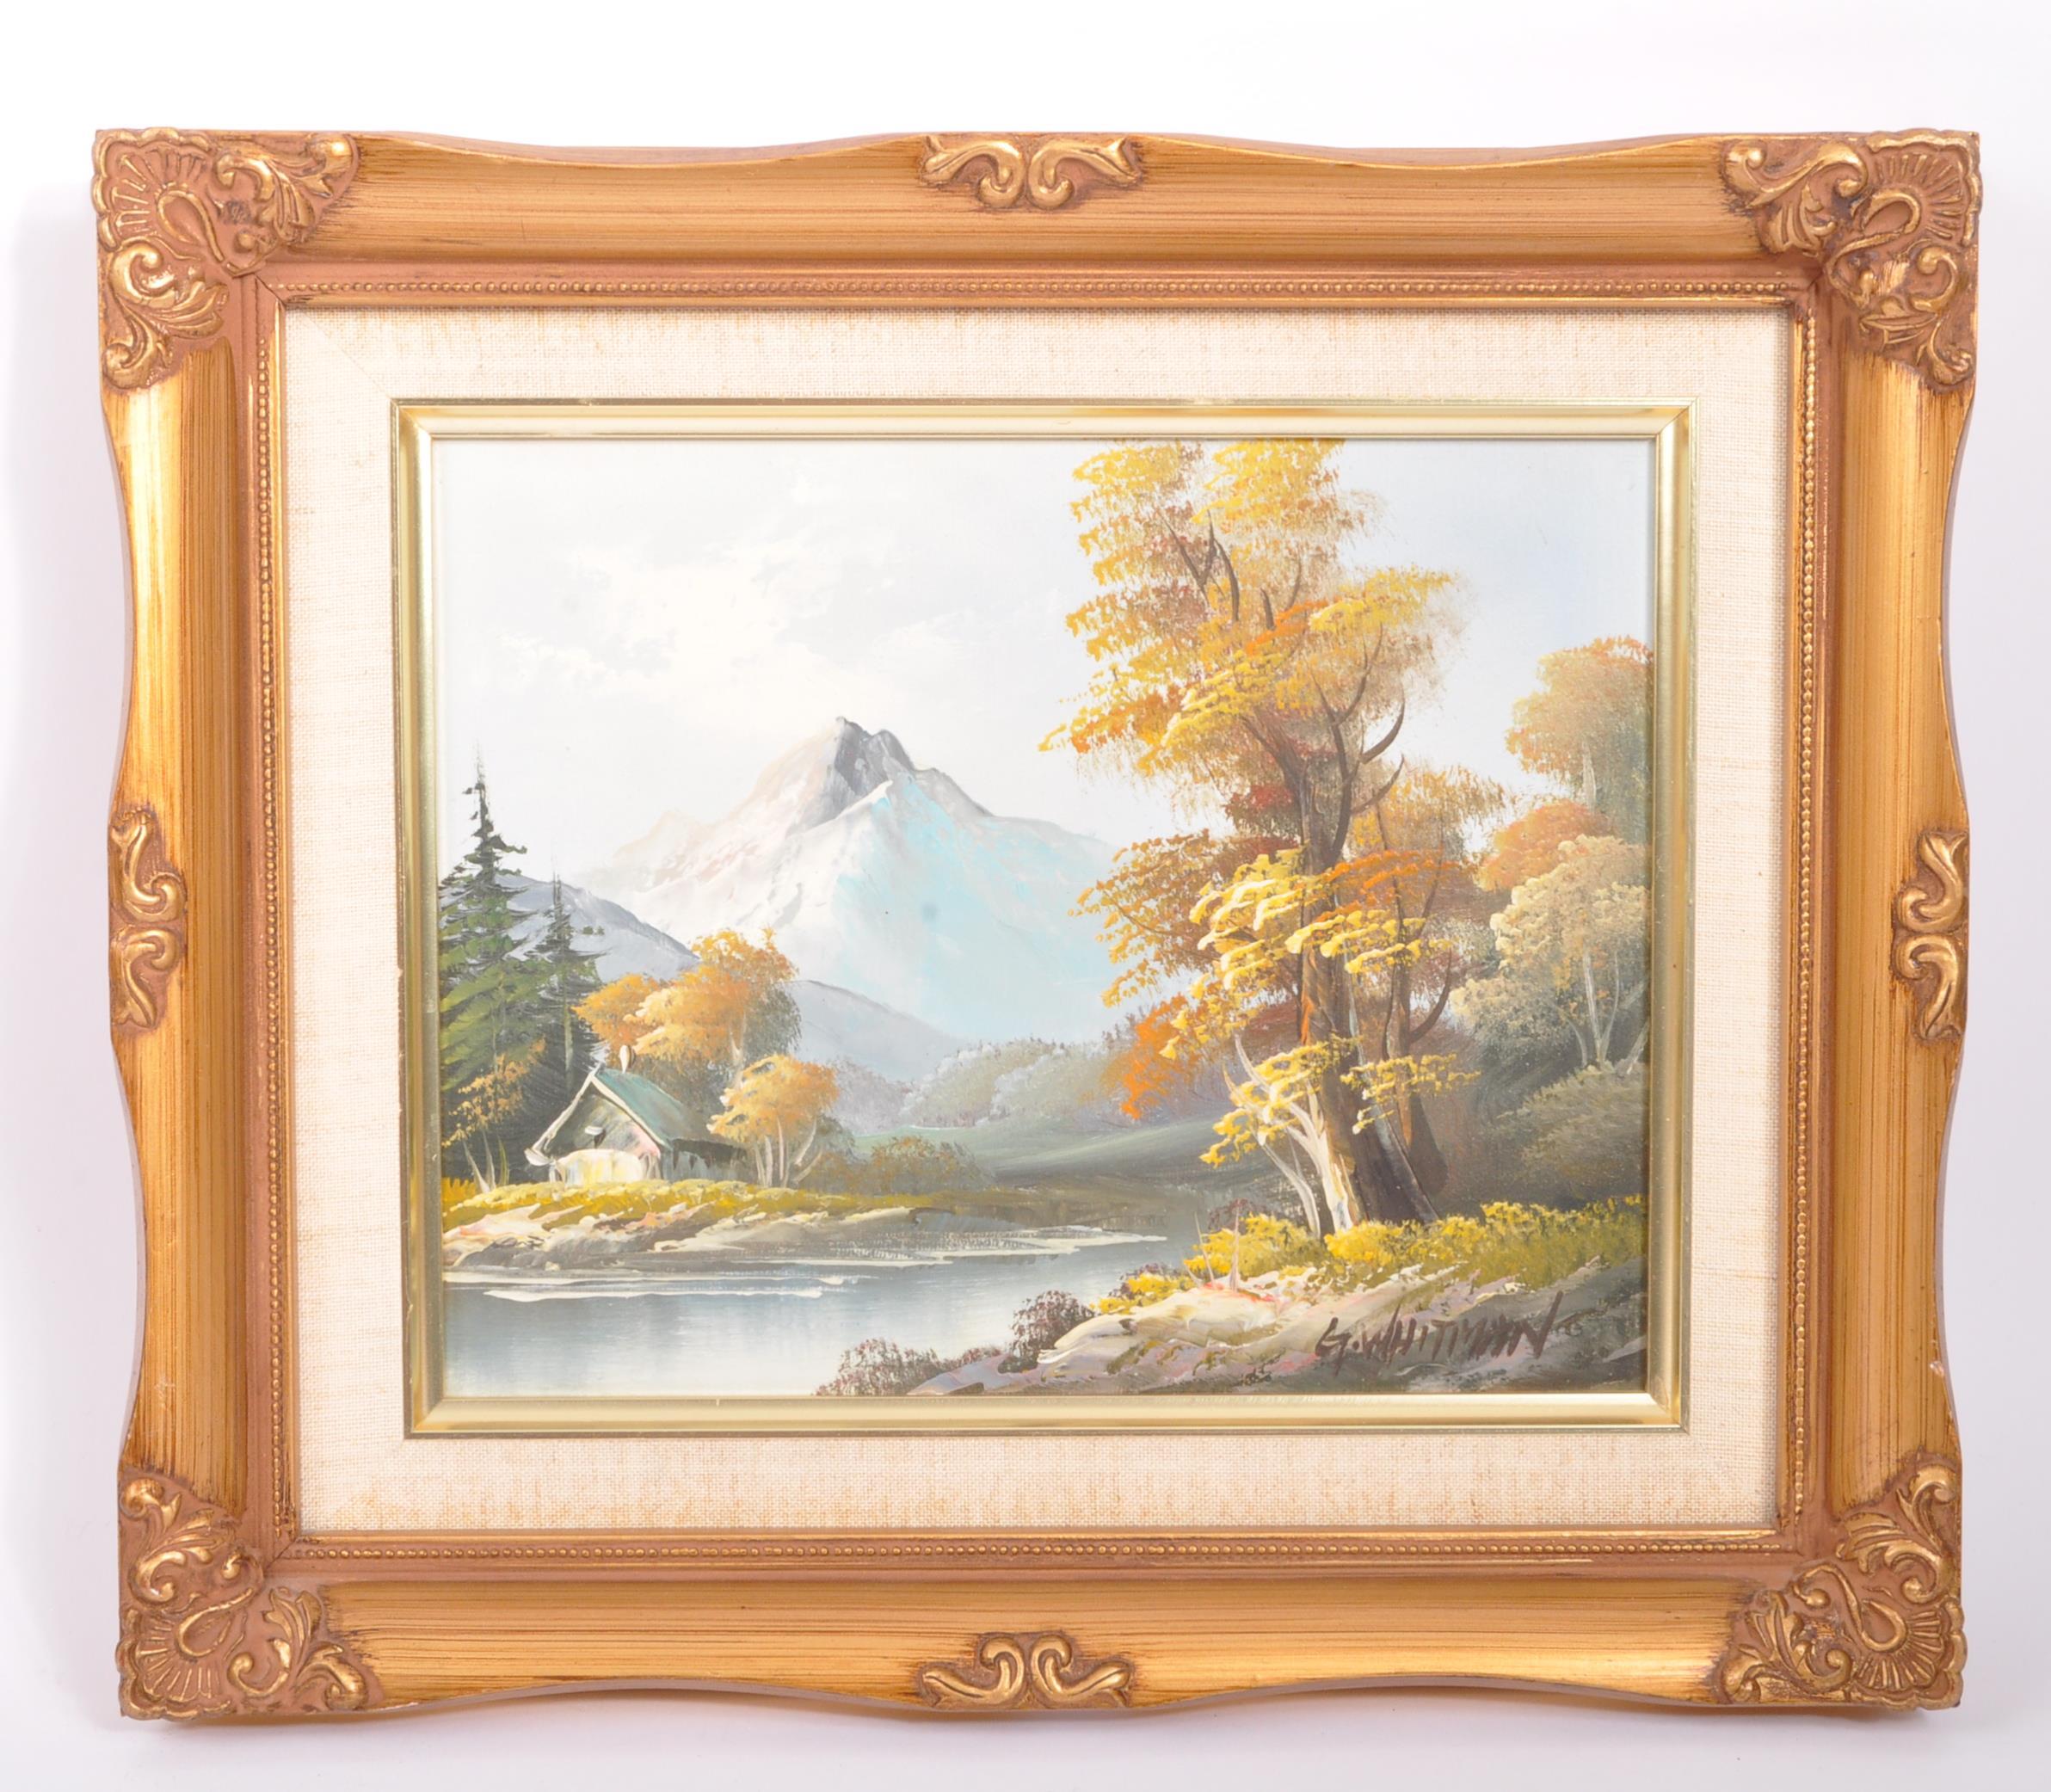 PAIR OF VINTAGE RETRO OIL ON CANVAS SCENIC PAINTINGS - Image 2 of 8